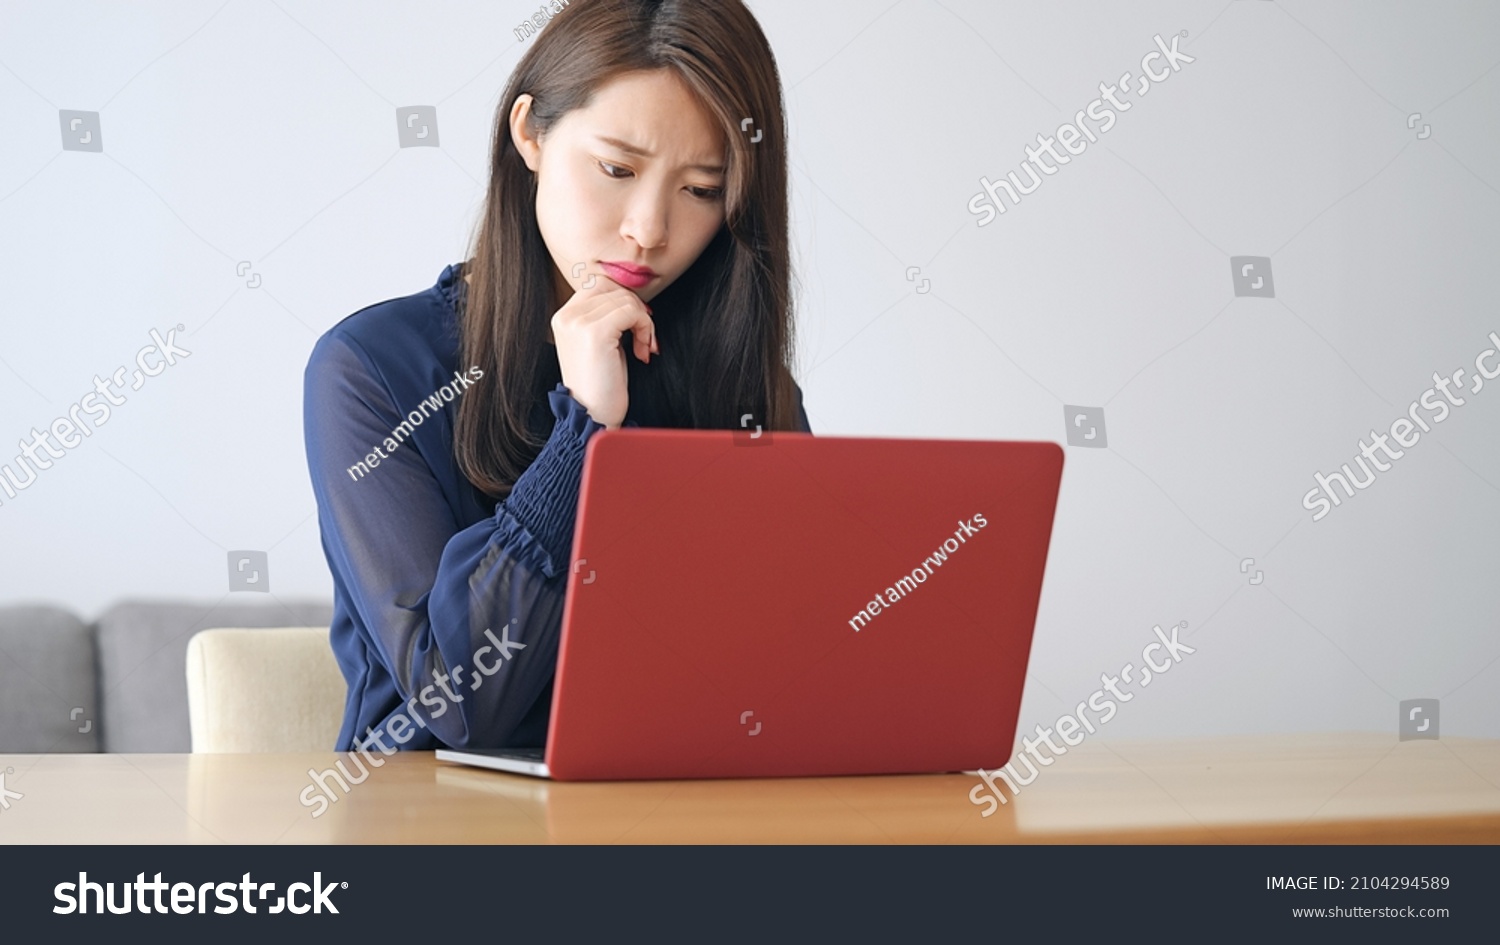 Worrying young Asian woman using a laptop PC. #2104294589